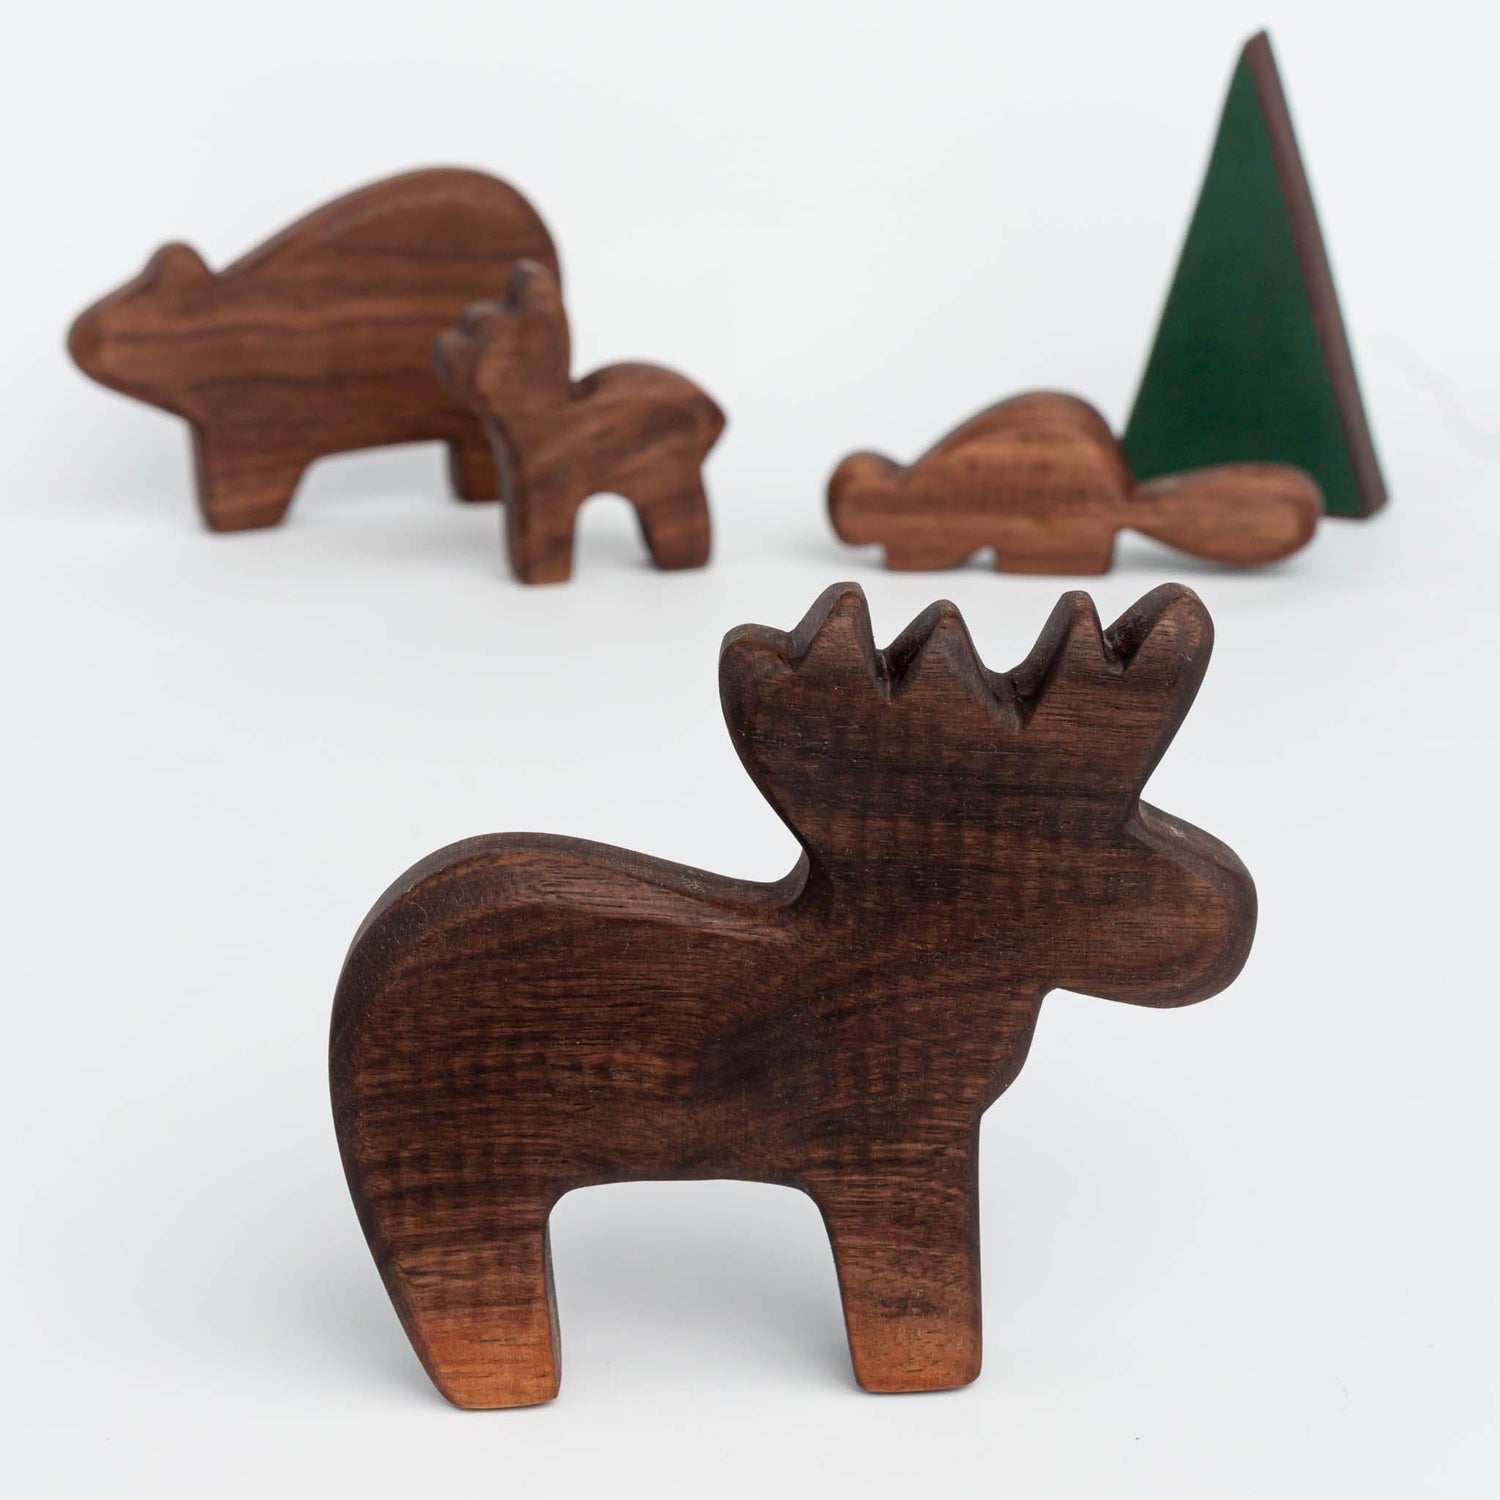 The Wooden Kind Wooden Animals Handmade Canadian Wooden Animal Set